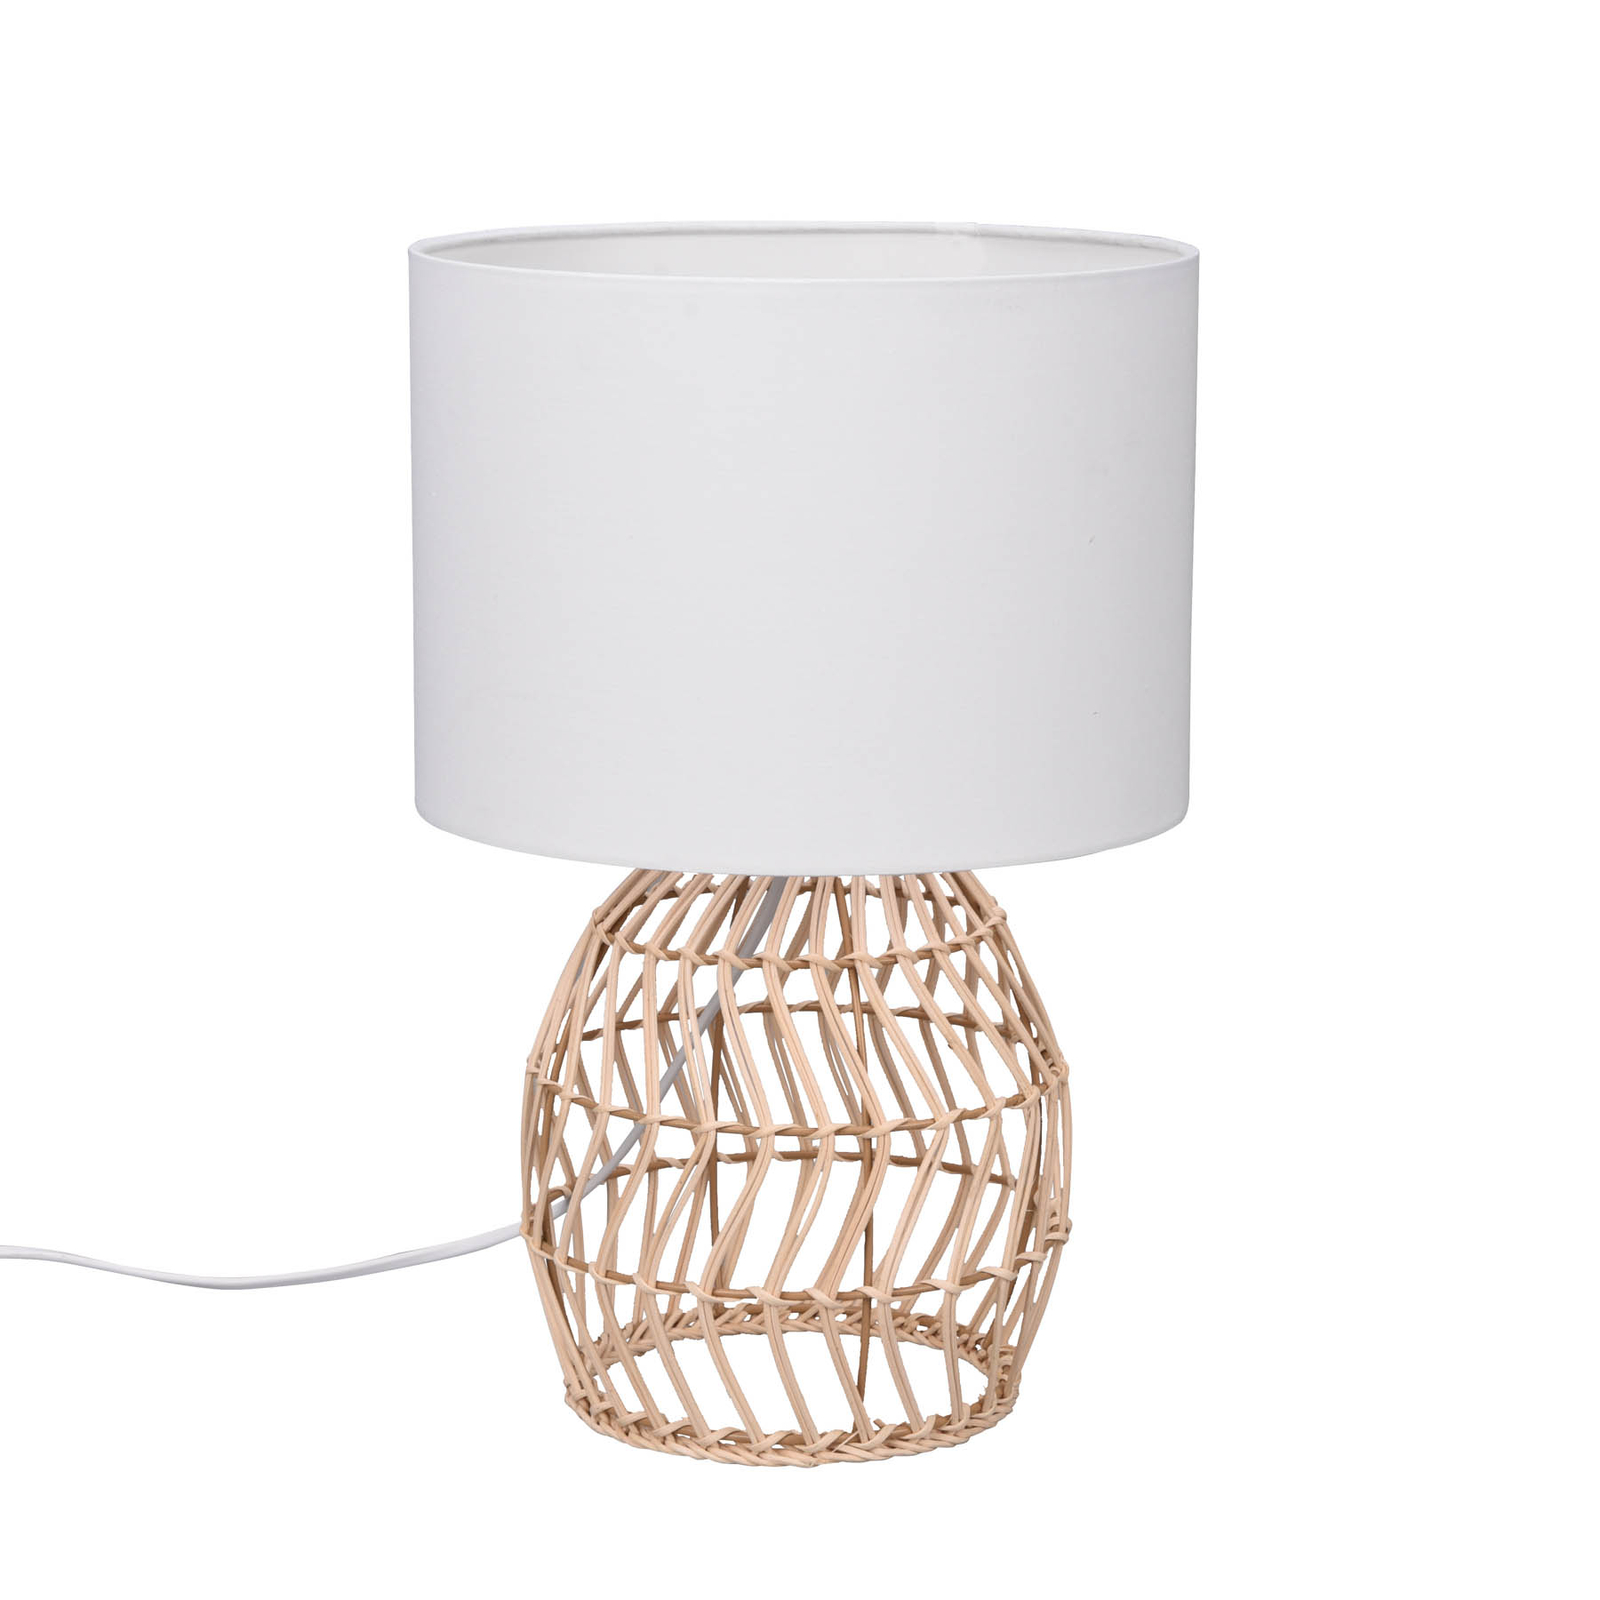 Rike table lamp, rattan frame and fabric lampshade